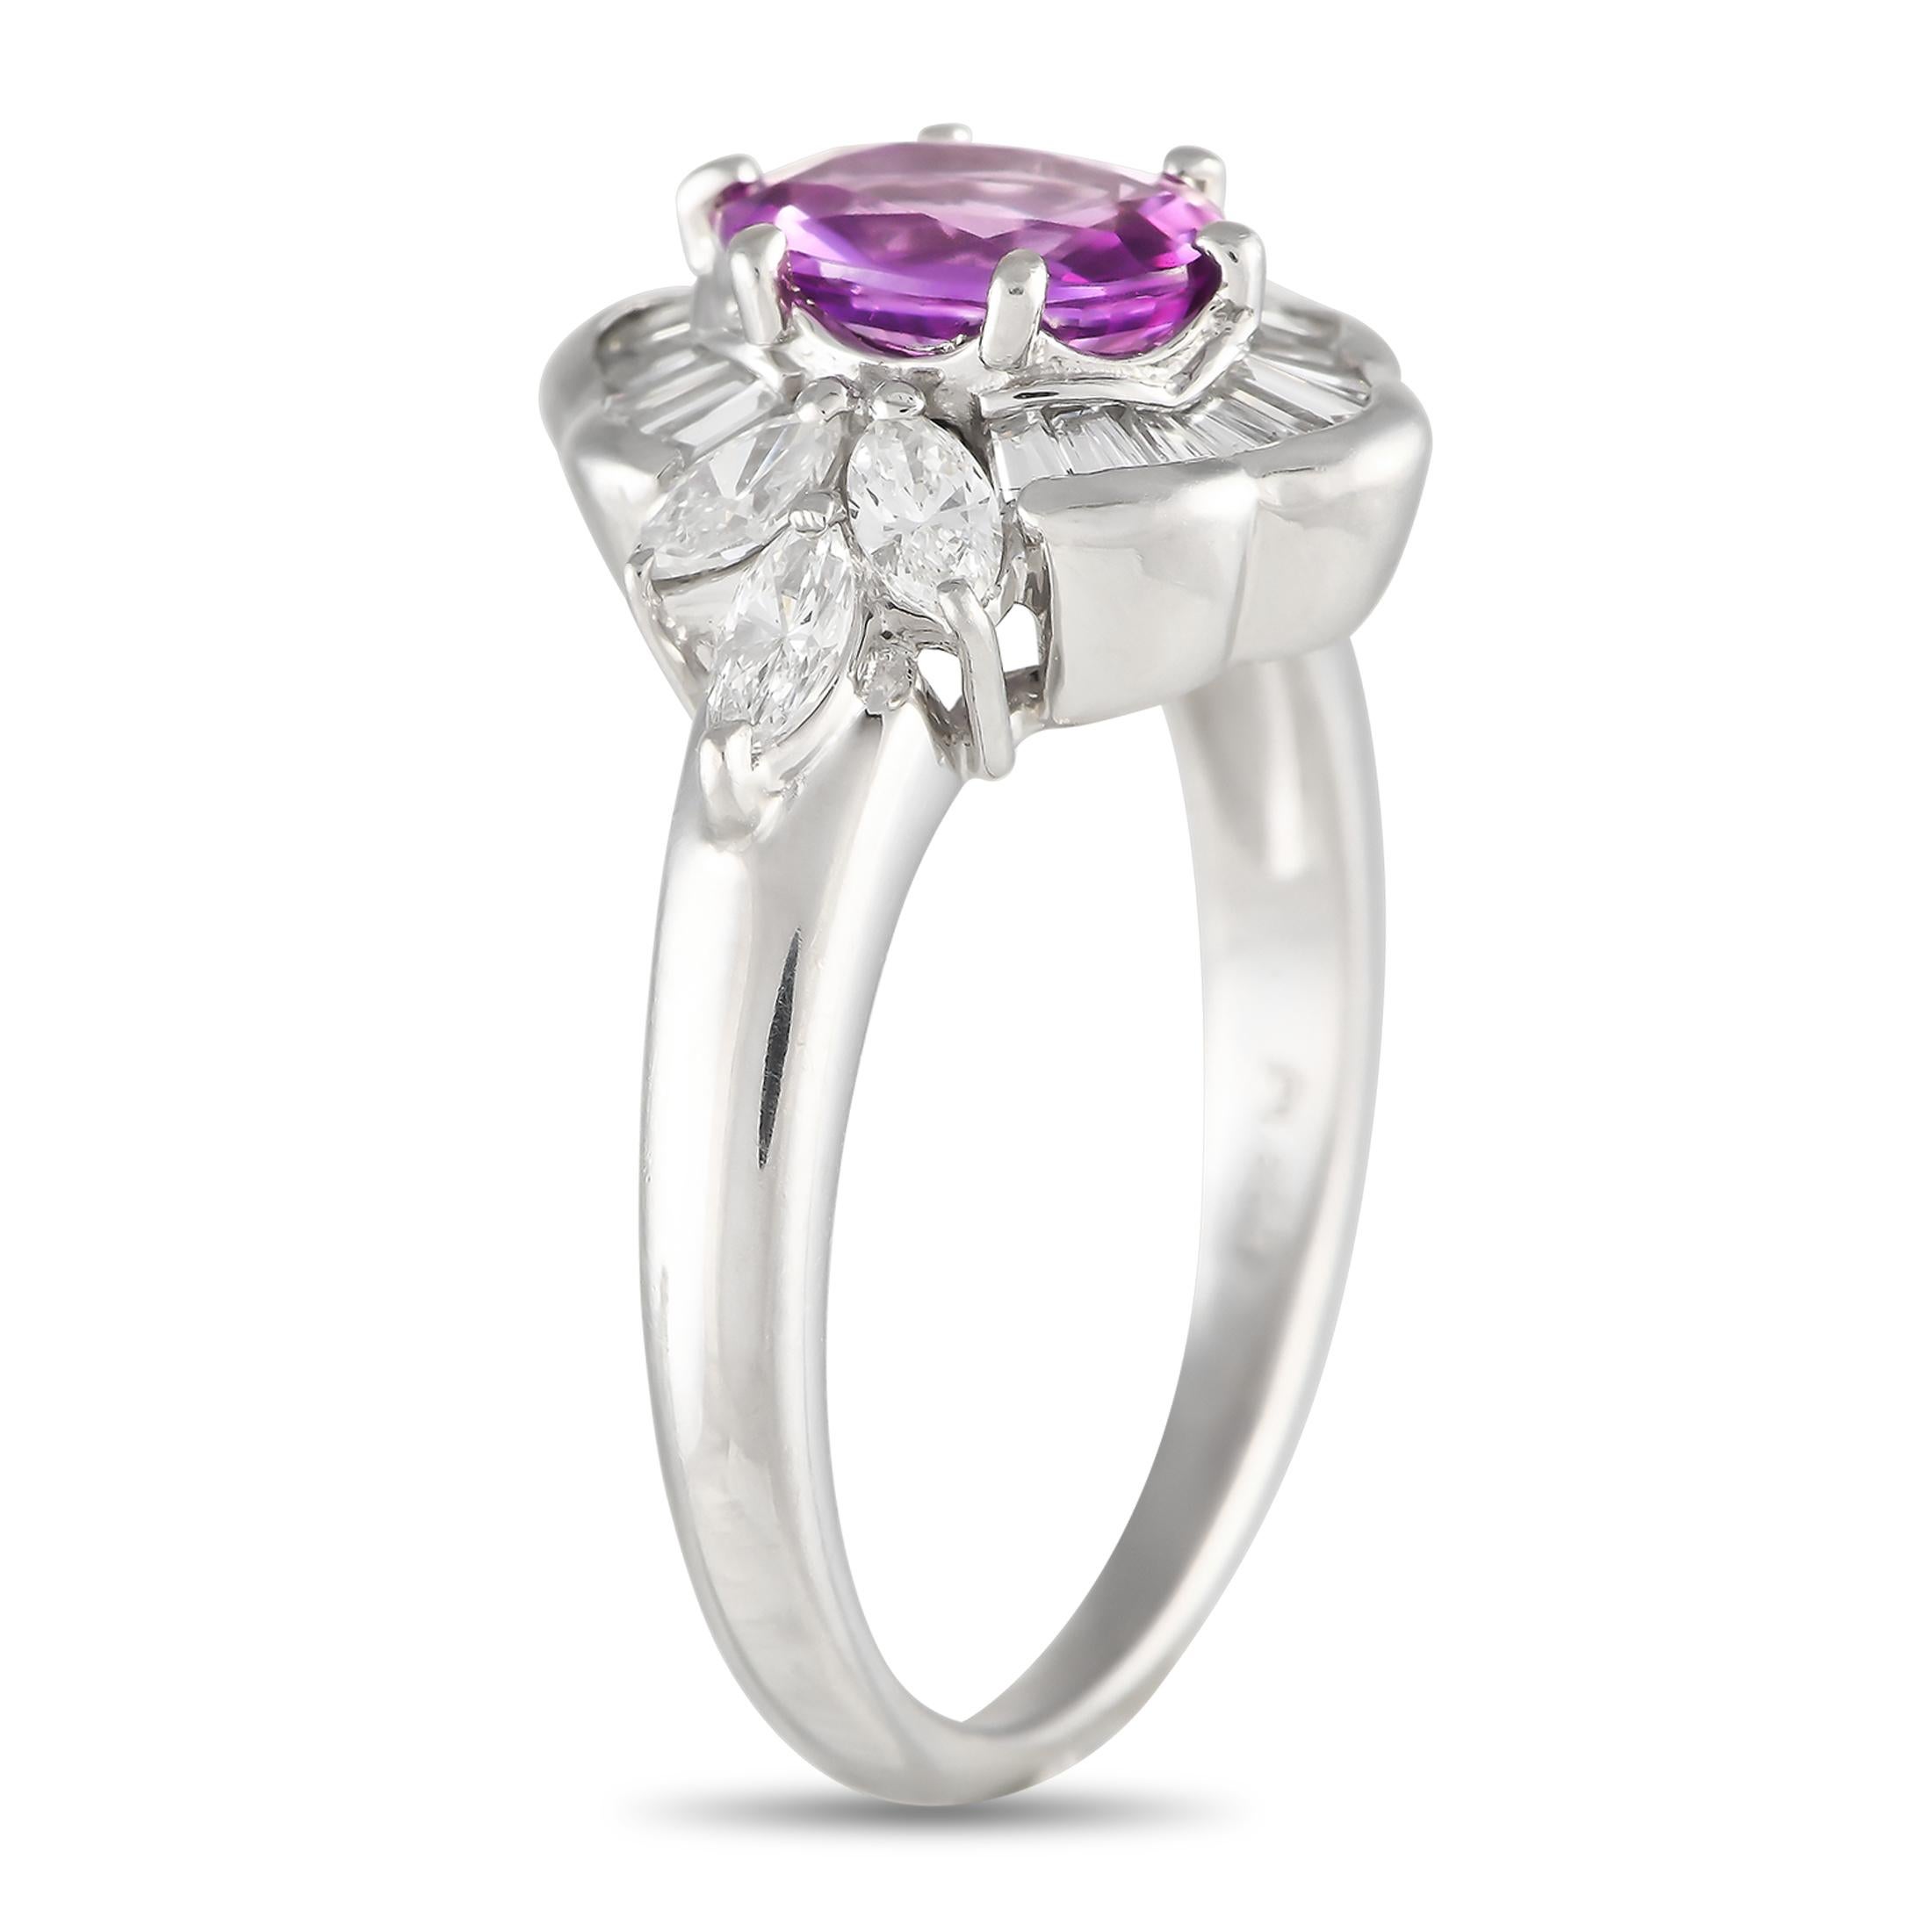 A captivating oval-cut 1.20 carat Pink Sapphire gemstone makes a statement at the center of this rings elegant Platinum setting. Elevated by a halo of sparkling Diamond accents totaling 0.67 carats, it features a 1mm wide band and a 6mm top